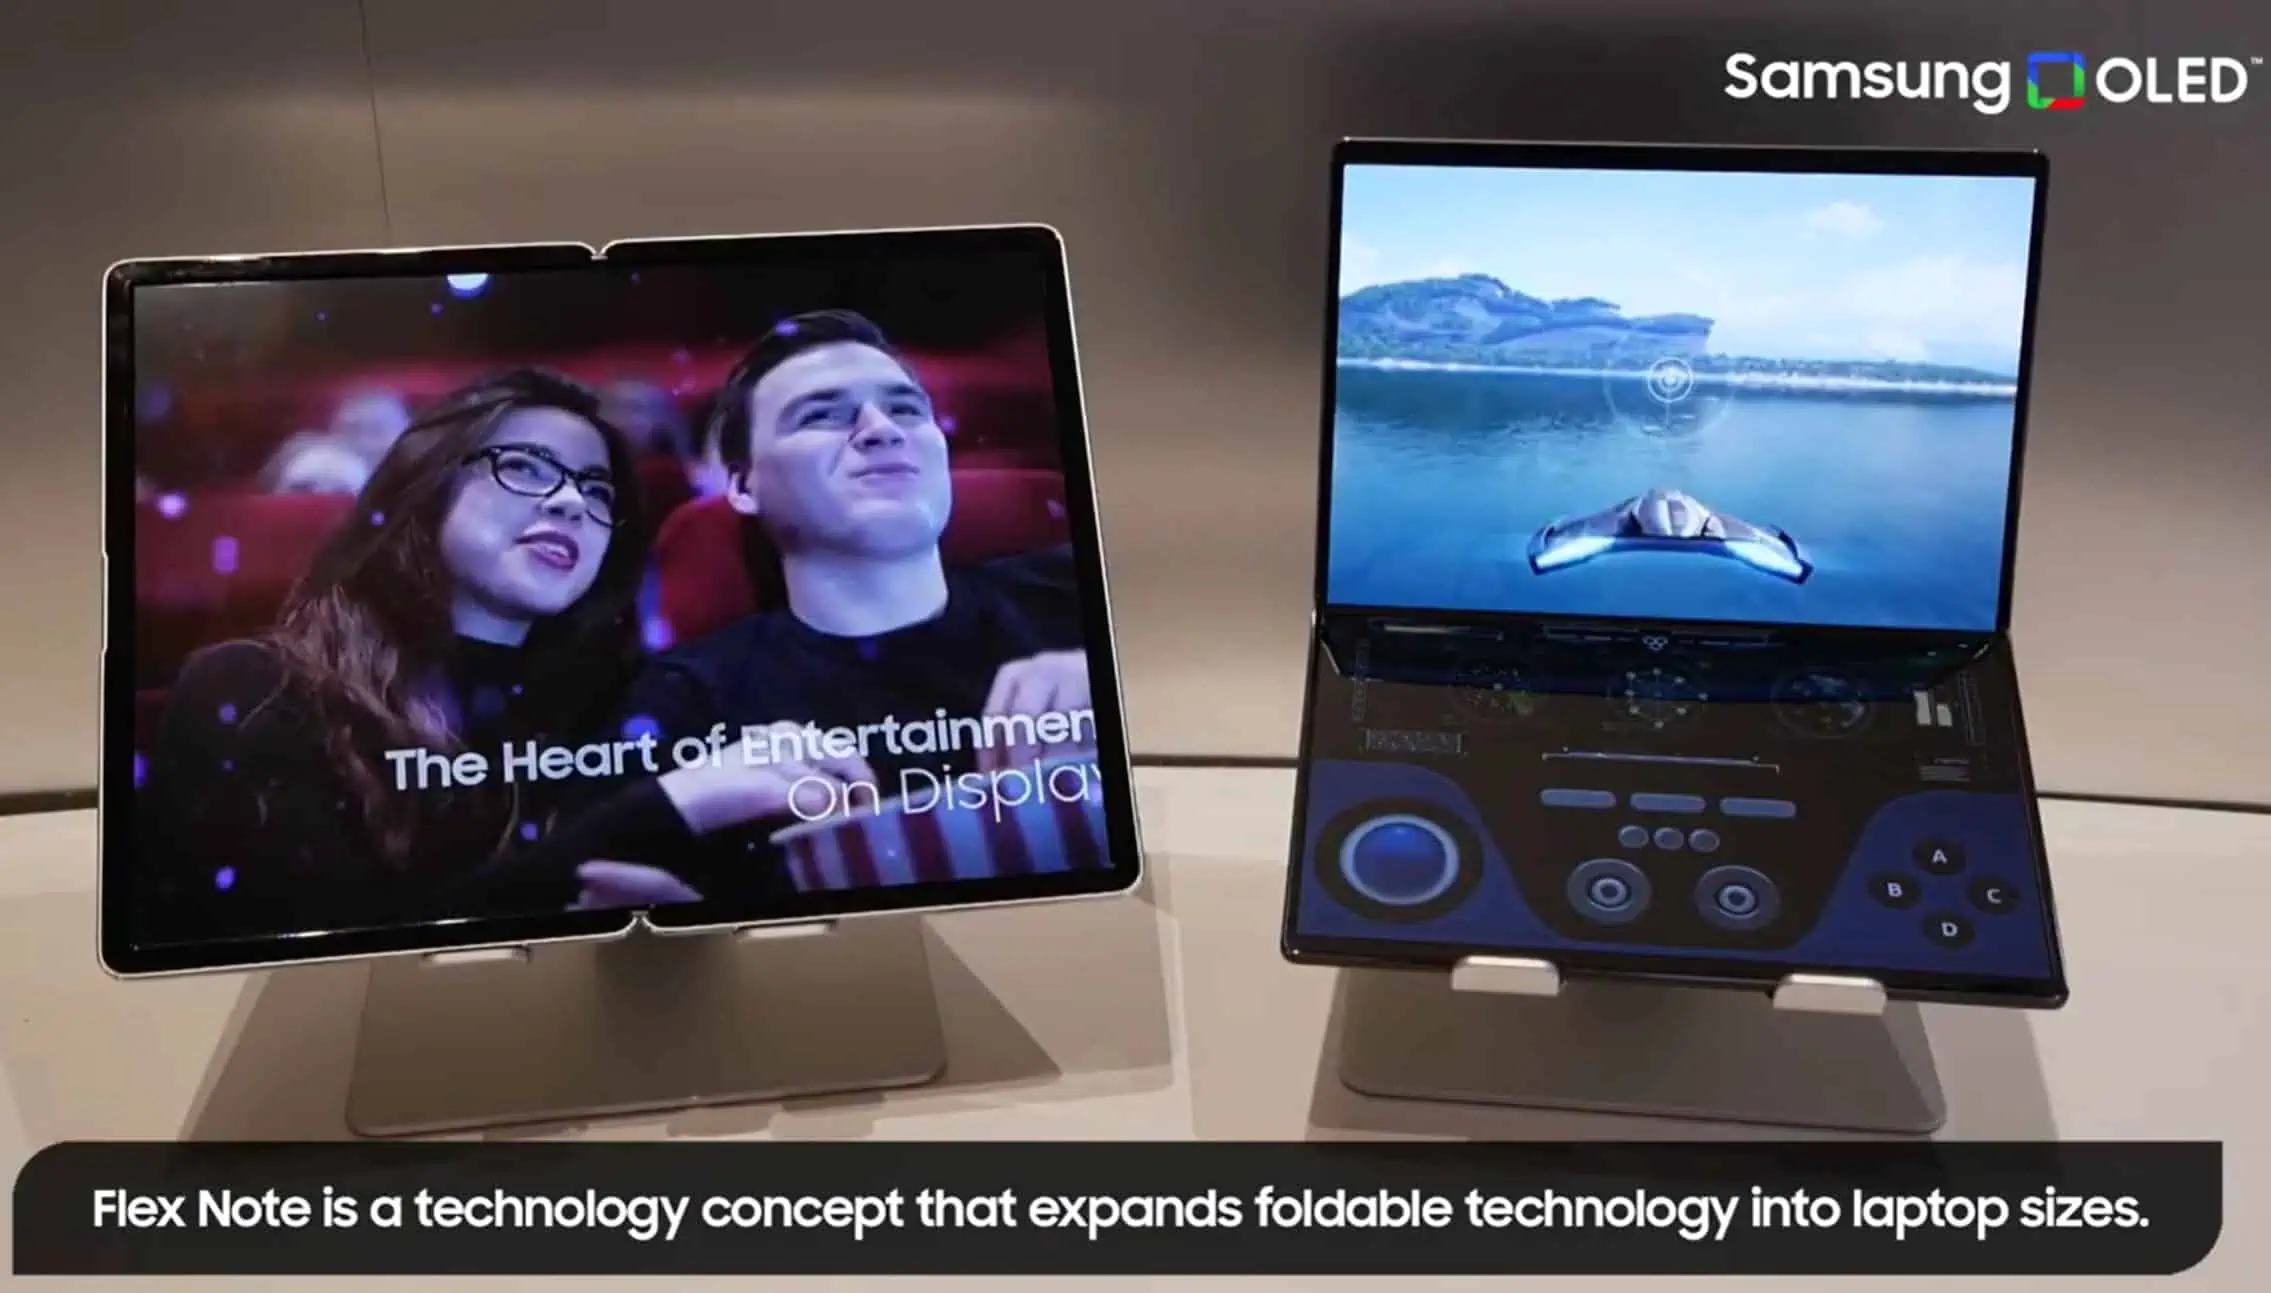 Samsung Flex Note appears to be a foldable laptop